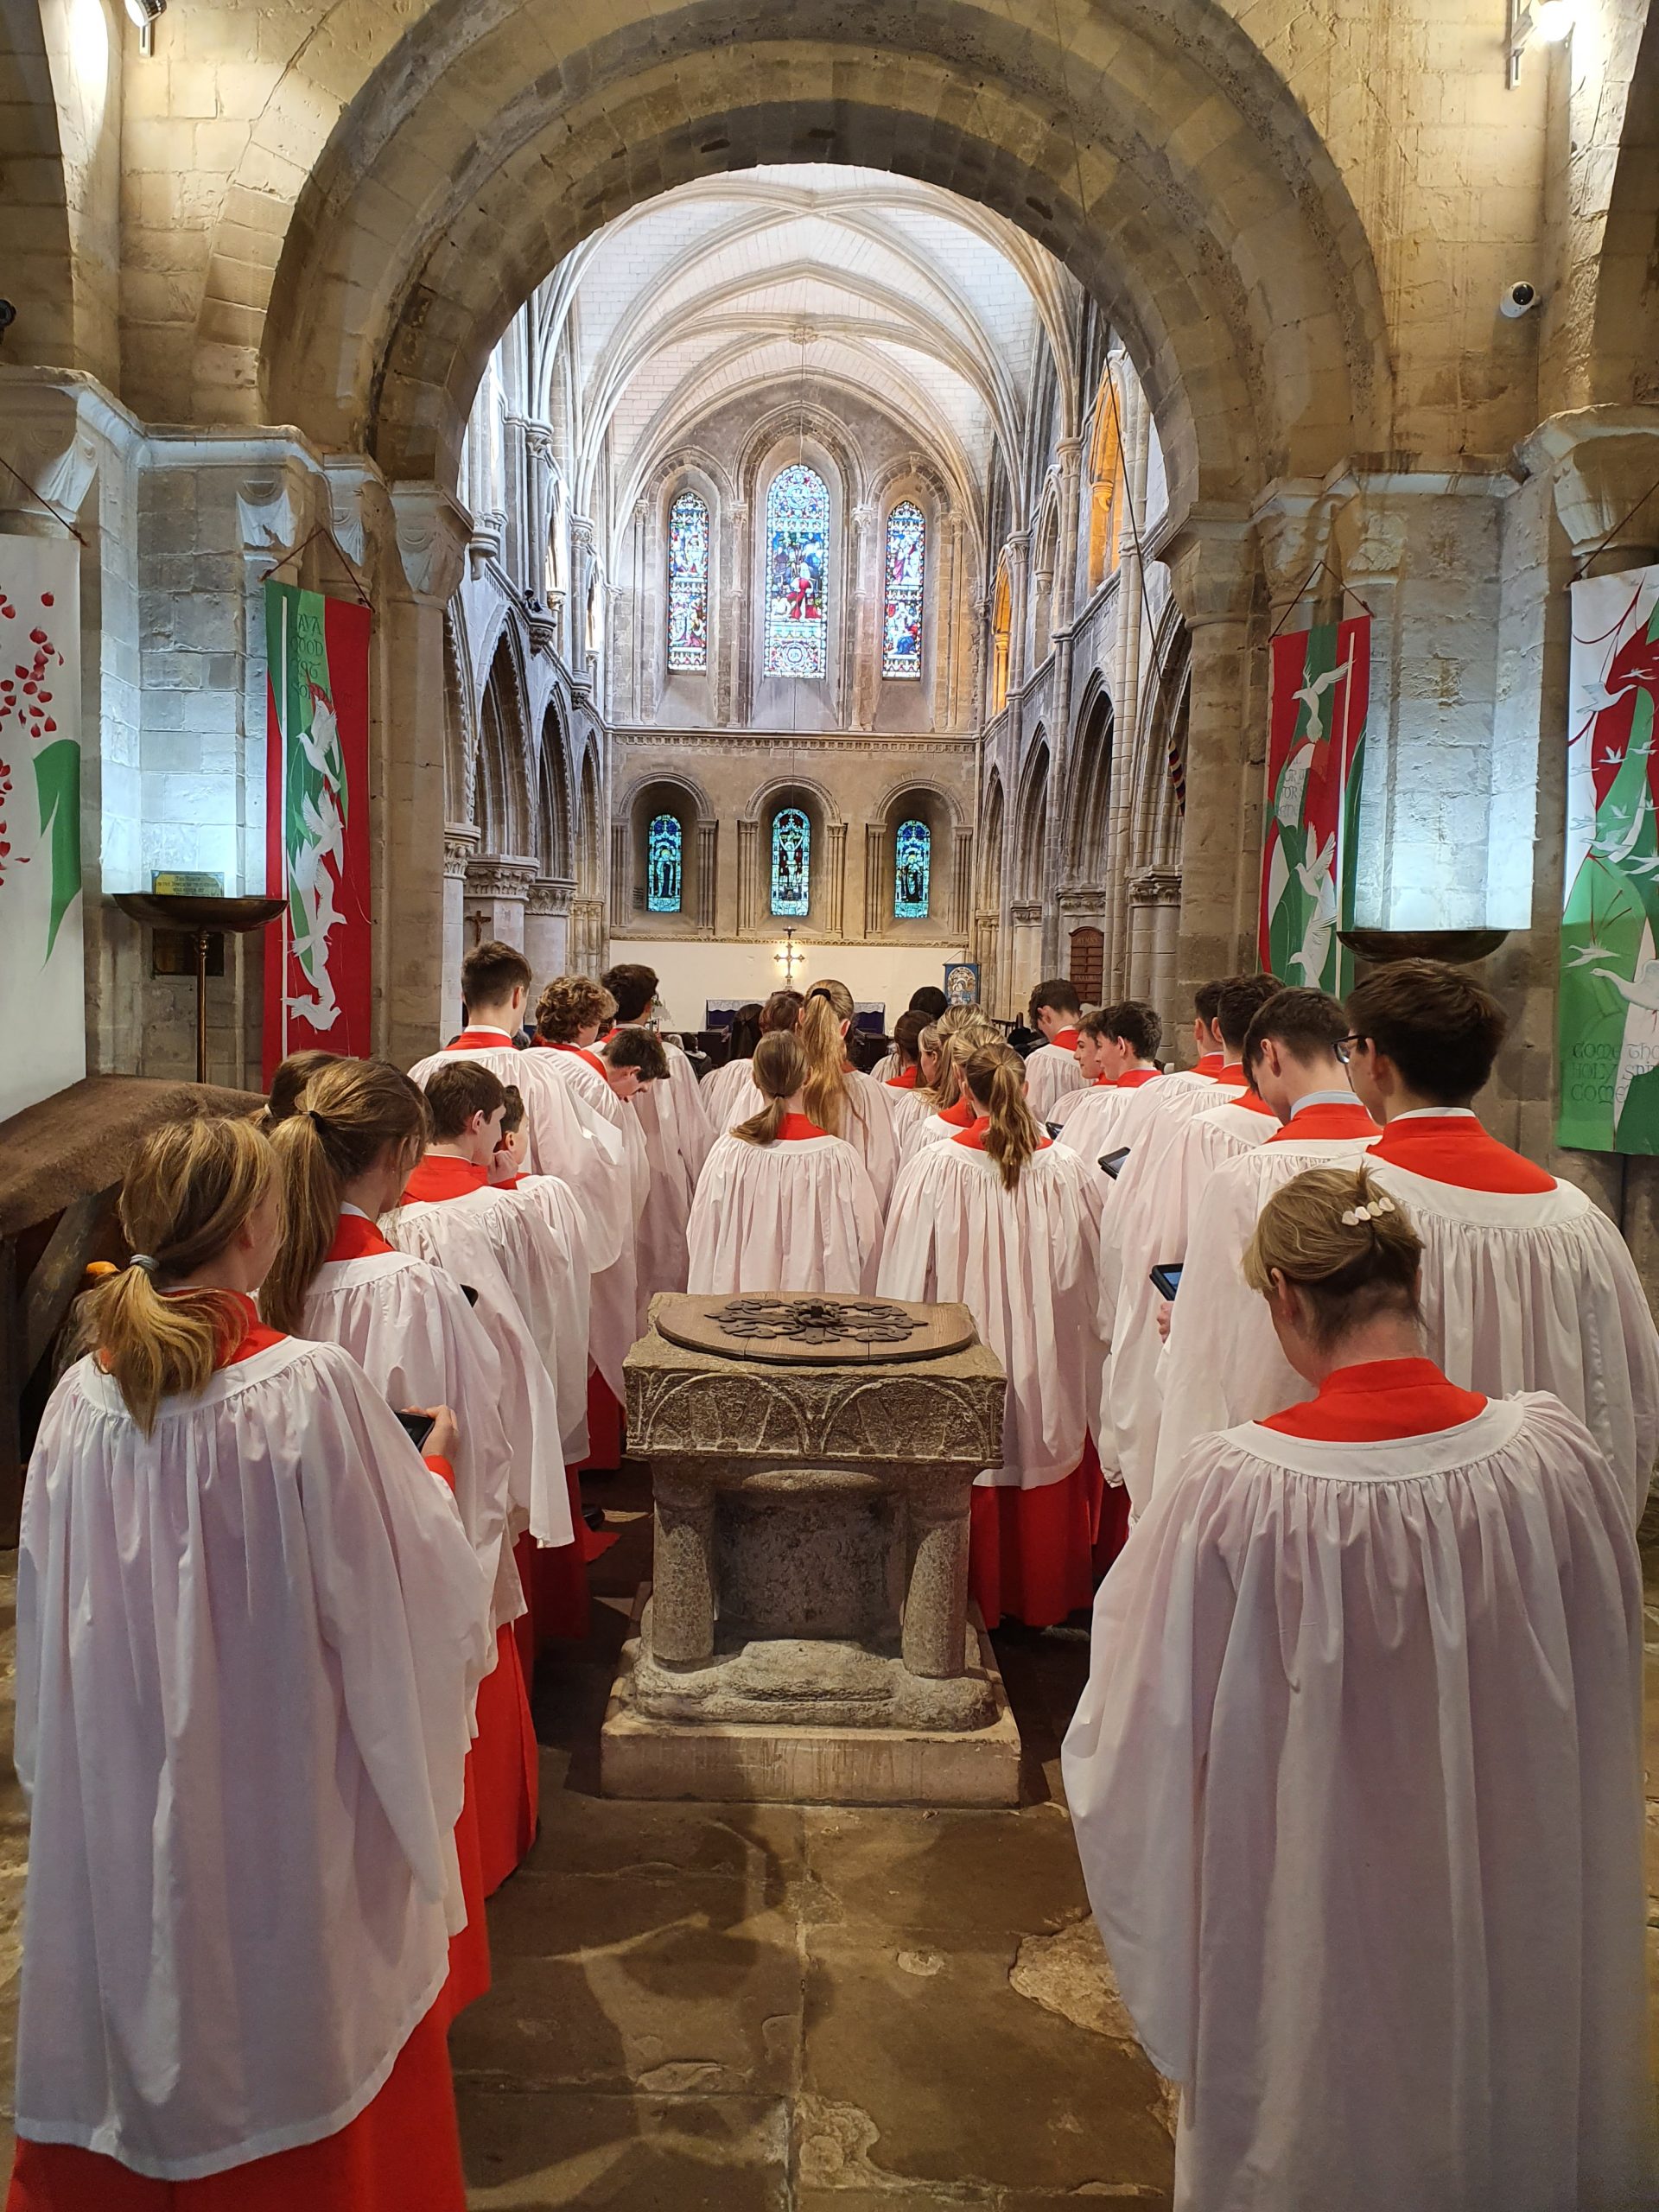 Seaford Chapel choir in their white and red robes singing in a traditional looking stone church building as the walk down the central isle towards the front..